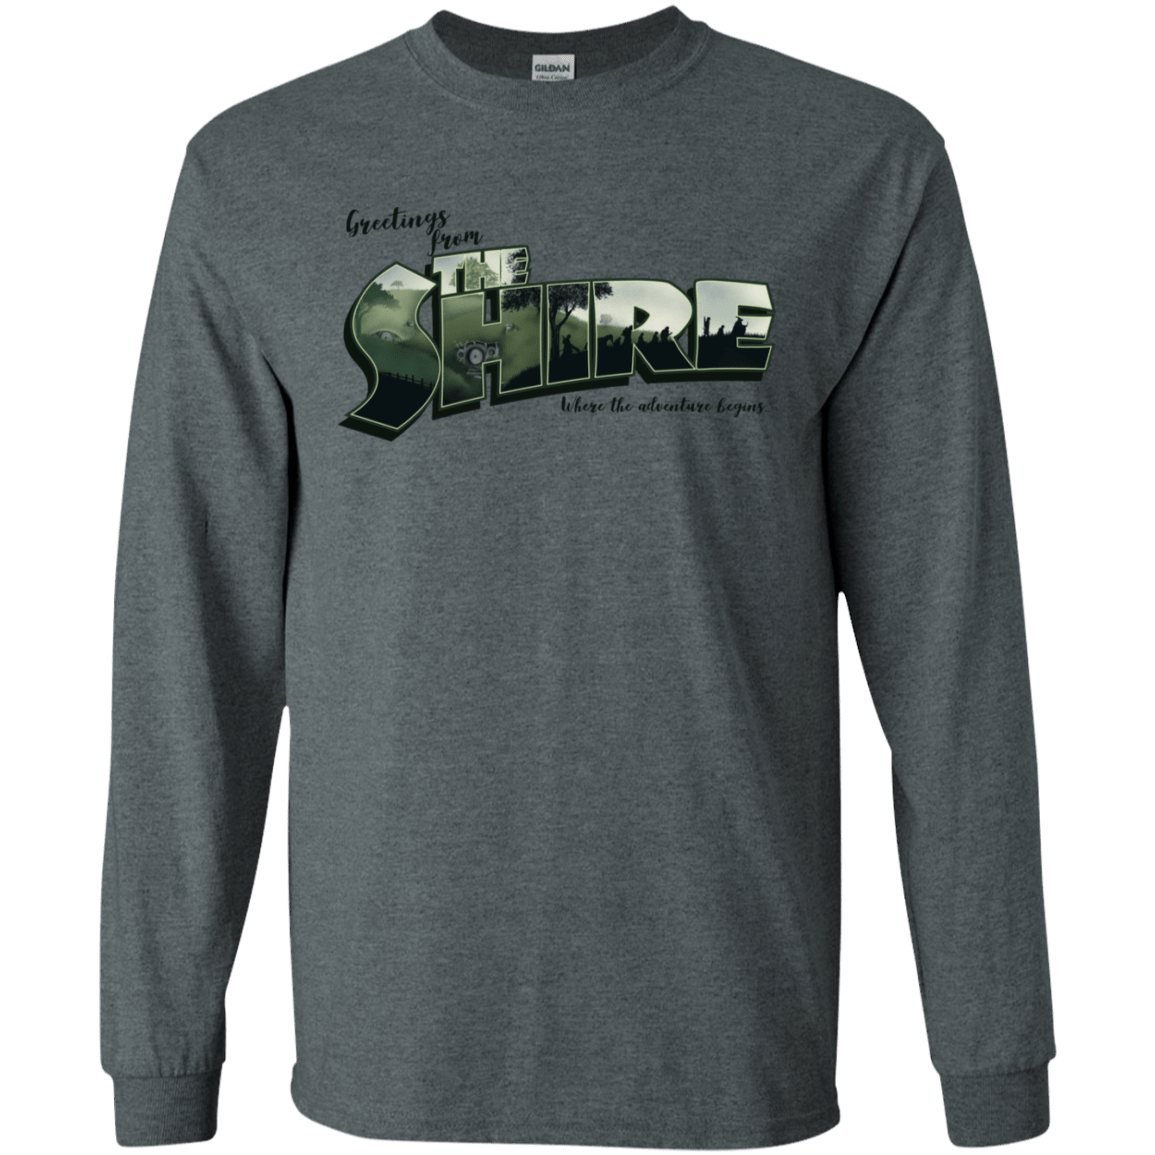 T-Shirts Dark Heather / S Greetings from the Shire Men's Long Sleeve T-Shirt